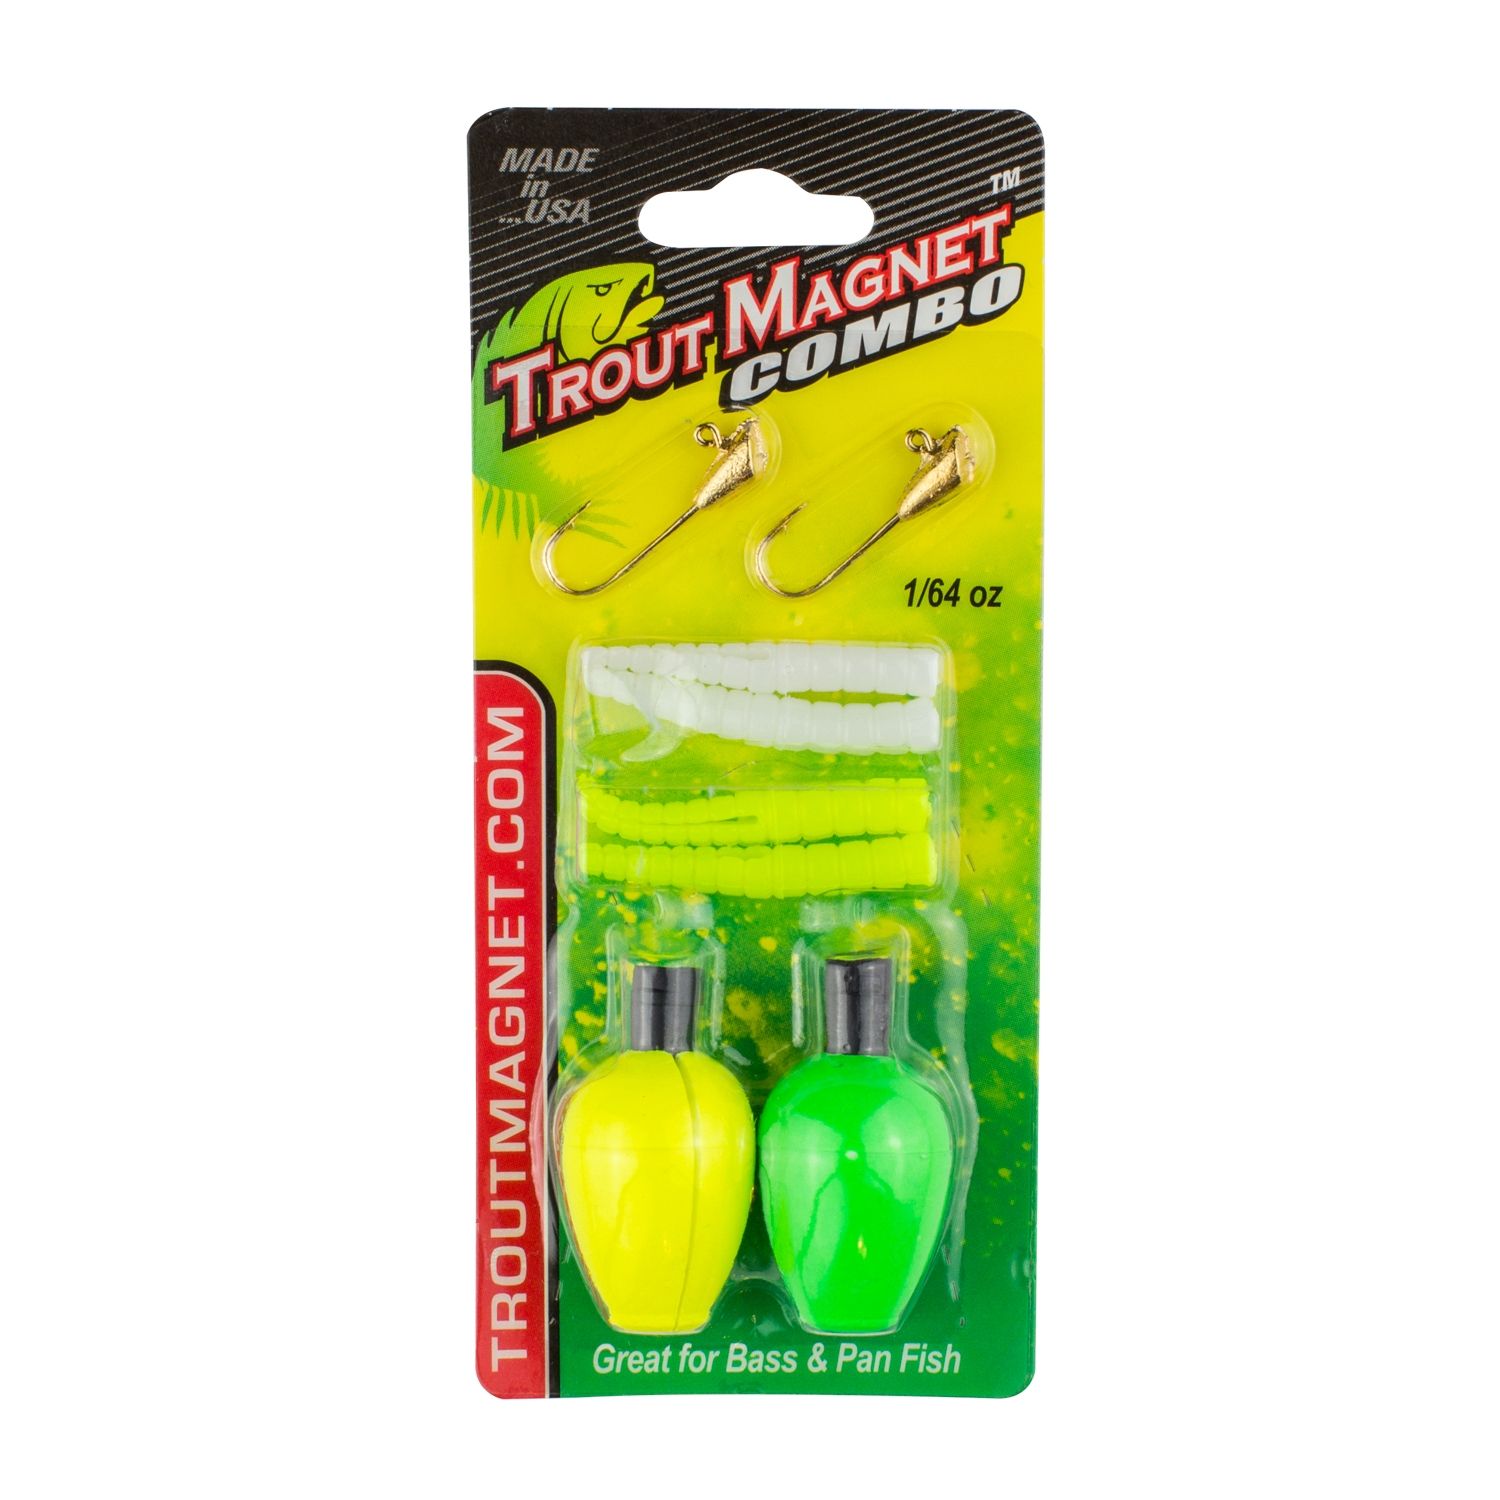 Leland Lures Trout Magnet Combo Packs – Tackle World